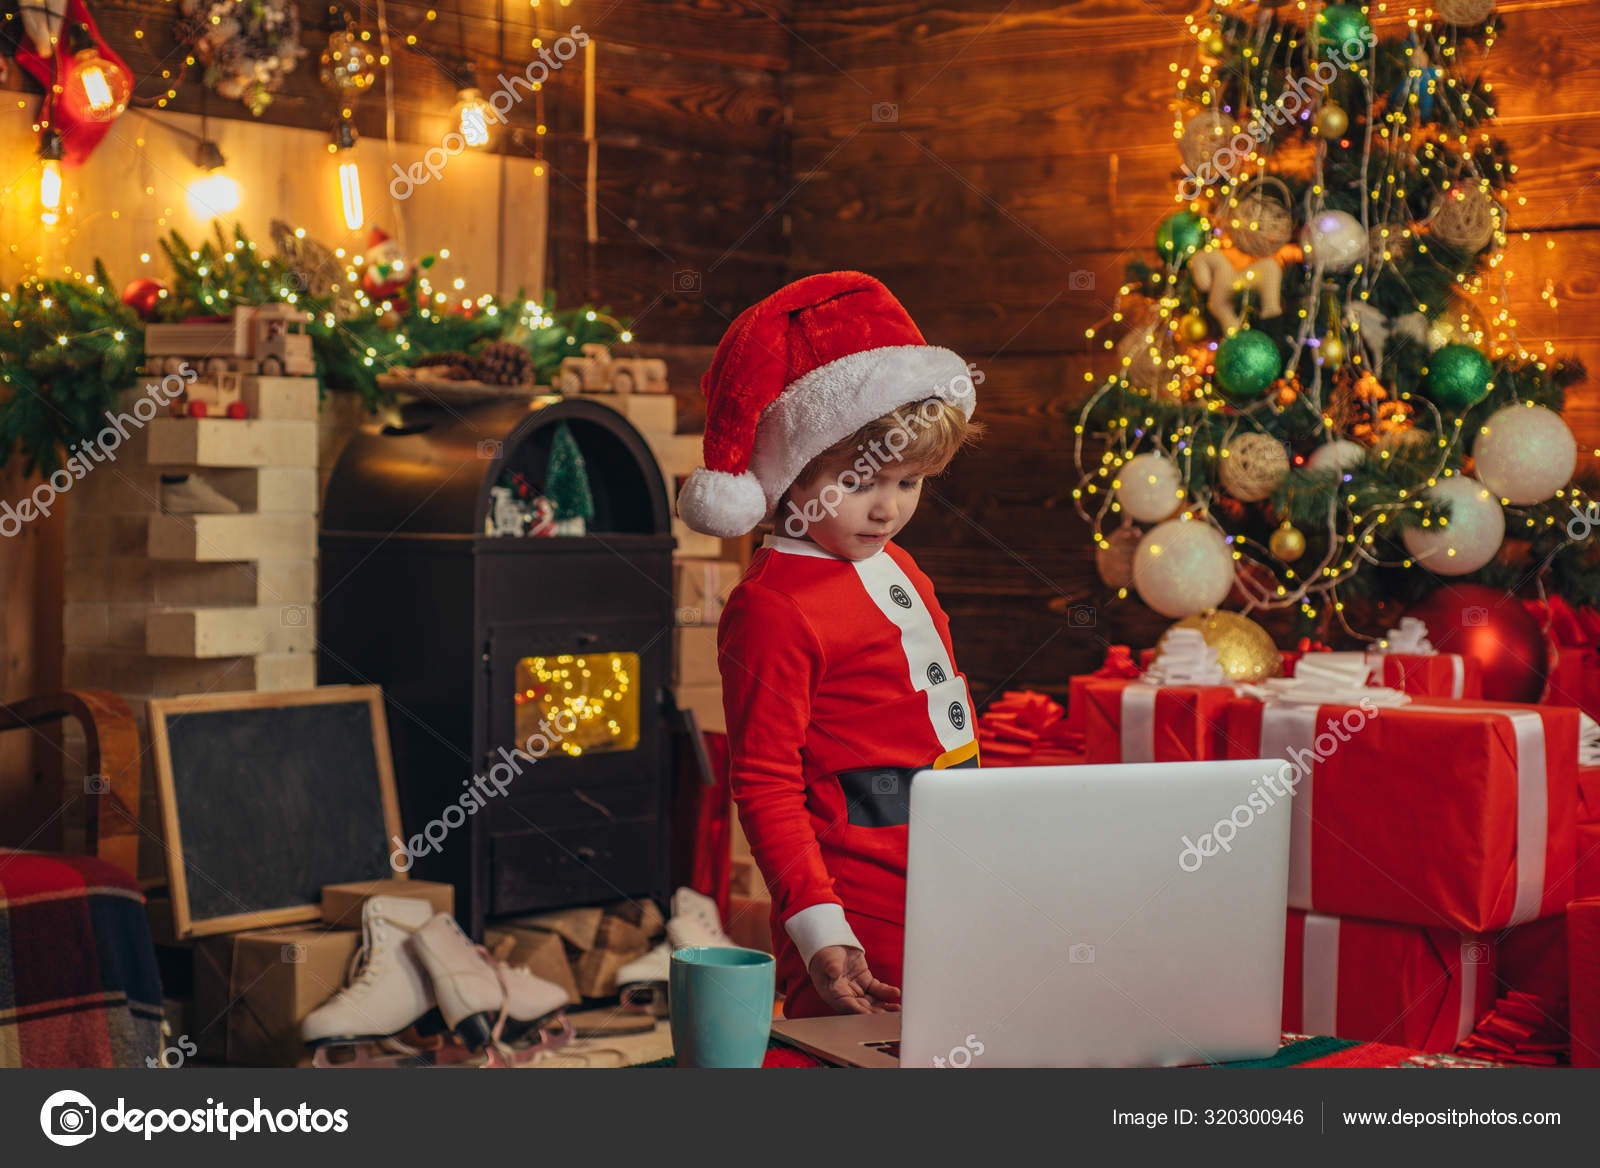 Smart Toddler Surfing Internet Santa Little Helper Little Boy Santa Hat And Costume Boy Child With Laptop Near Christmas Tree Buy Christmas Gifts Online Christmas Shopping Concept Gifts Service Stock Photo